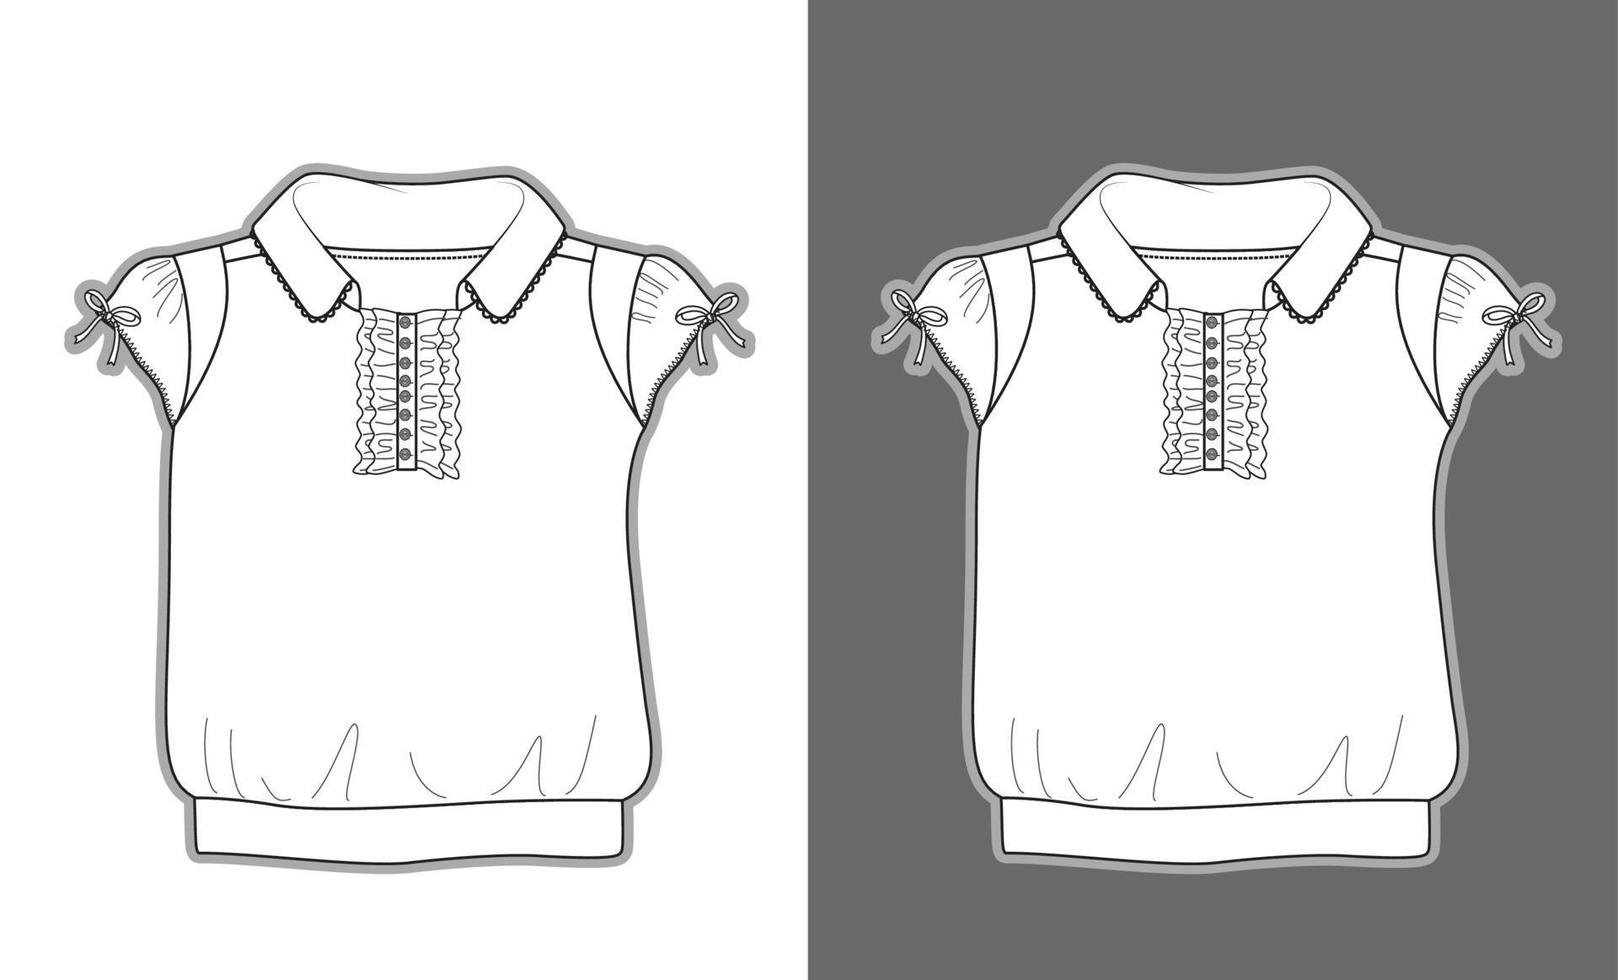 Kids polo shirt with ribbons on sleeves and ruffle details at front garment sketch fashion template vector